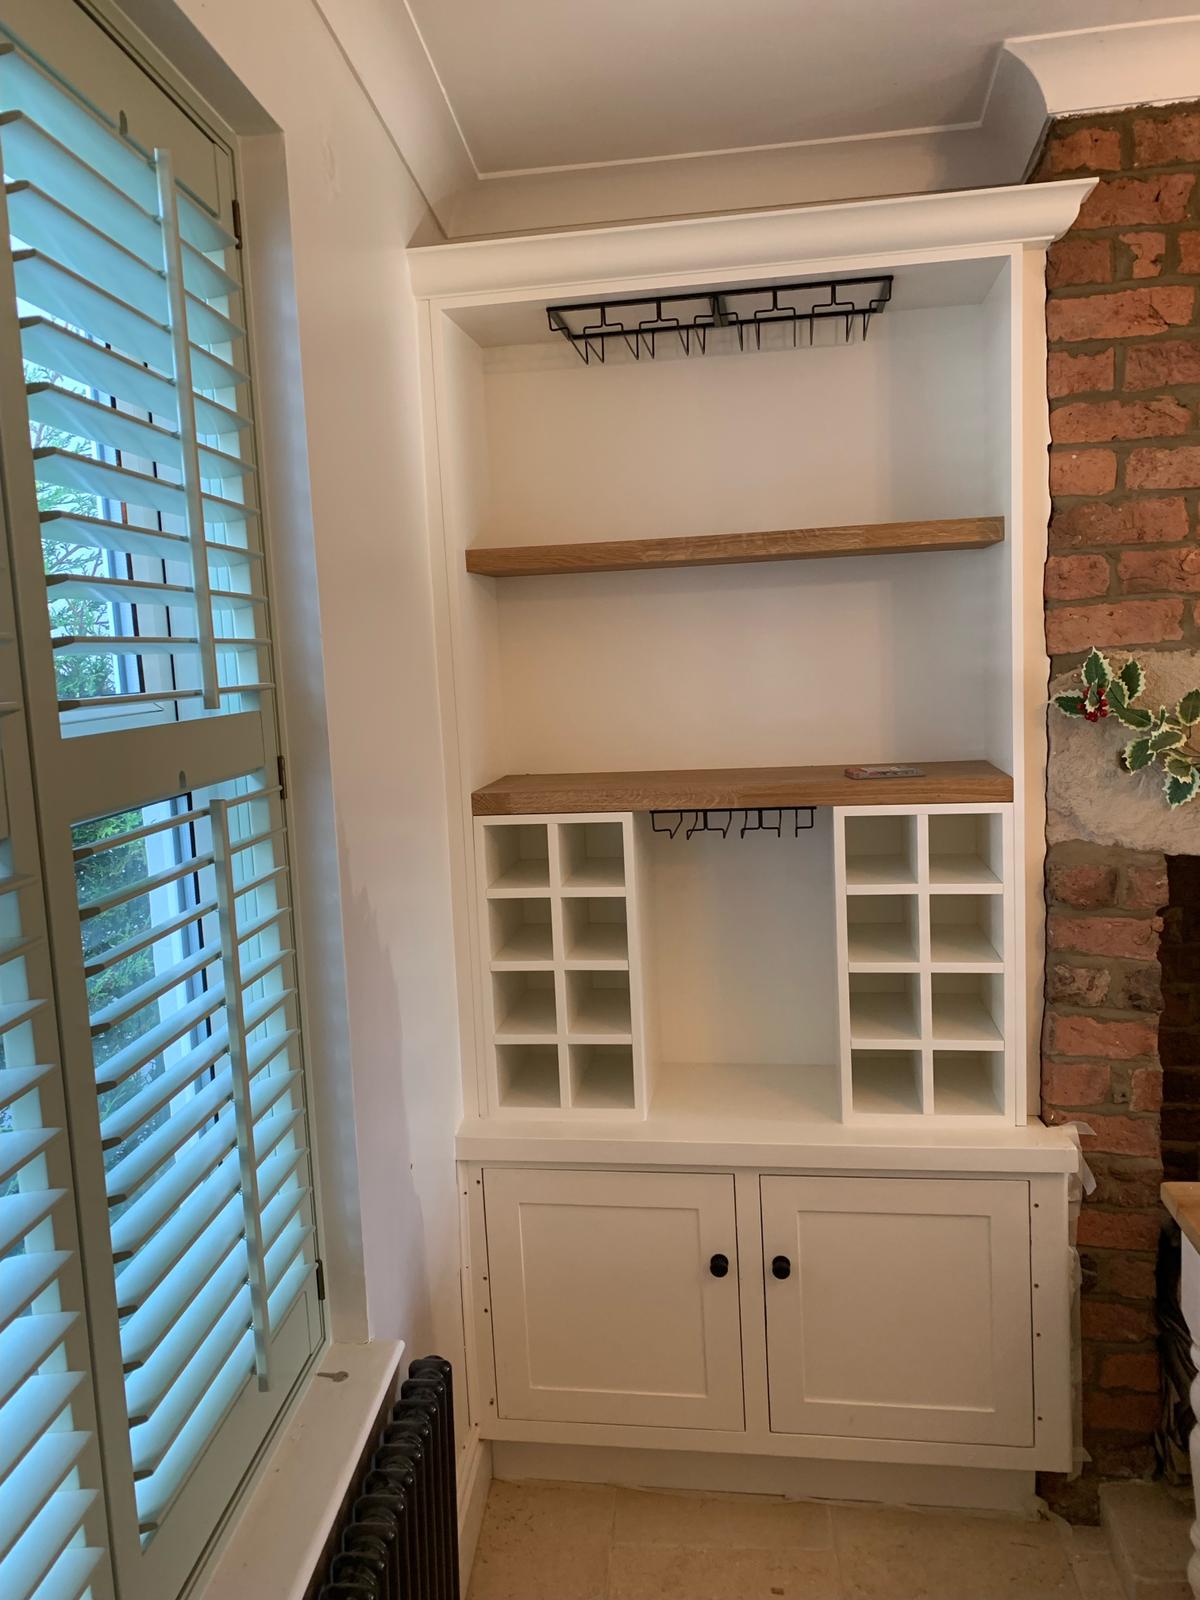 Bespoke Alcove Units made into great looking shelving solution in Harrogate by Joiner at Bailey Joinery